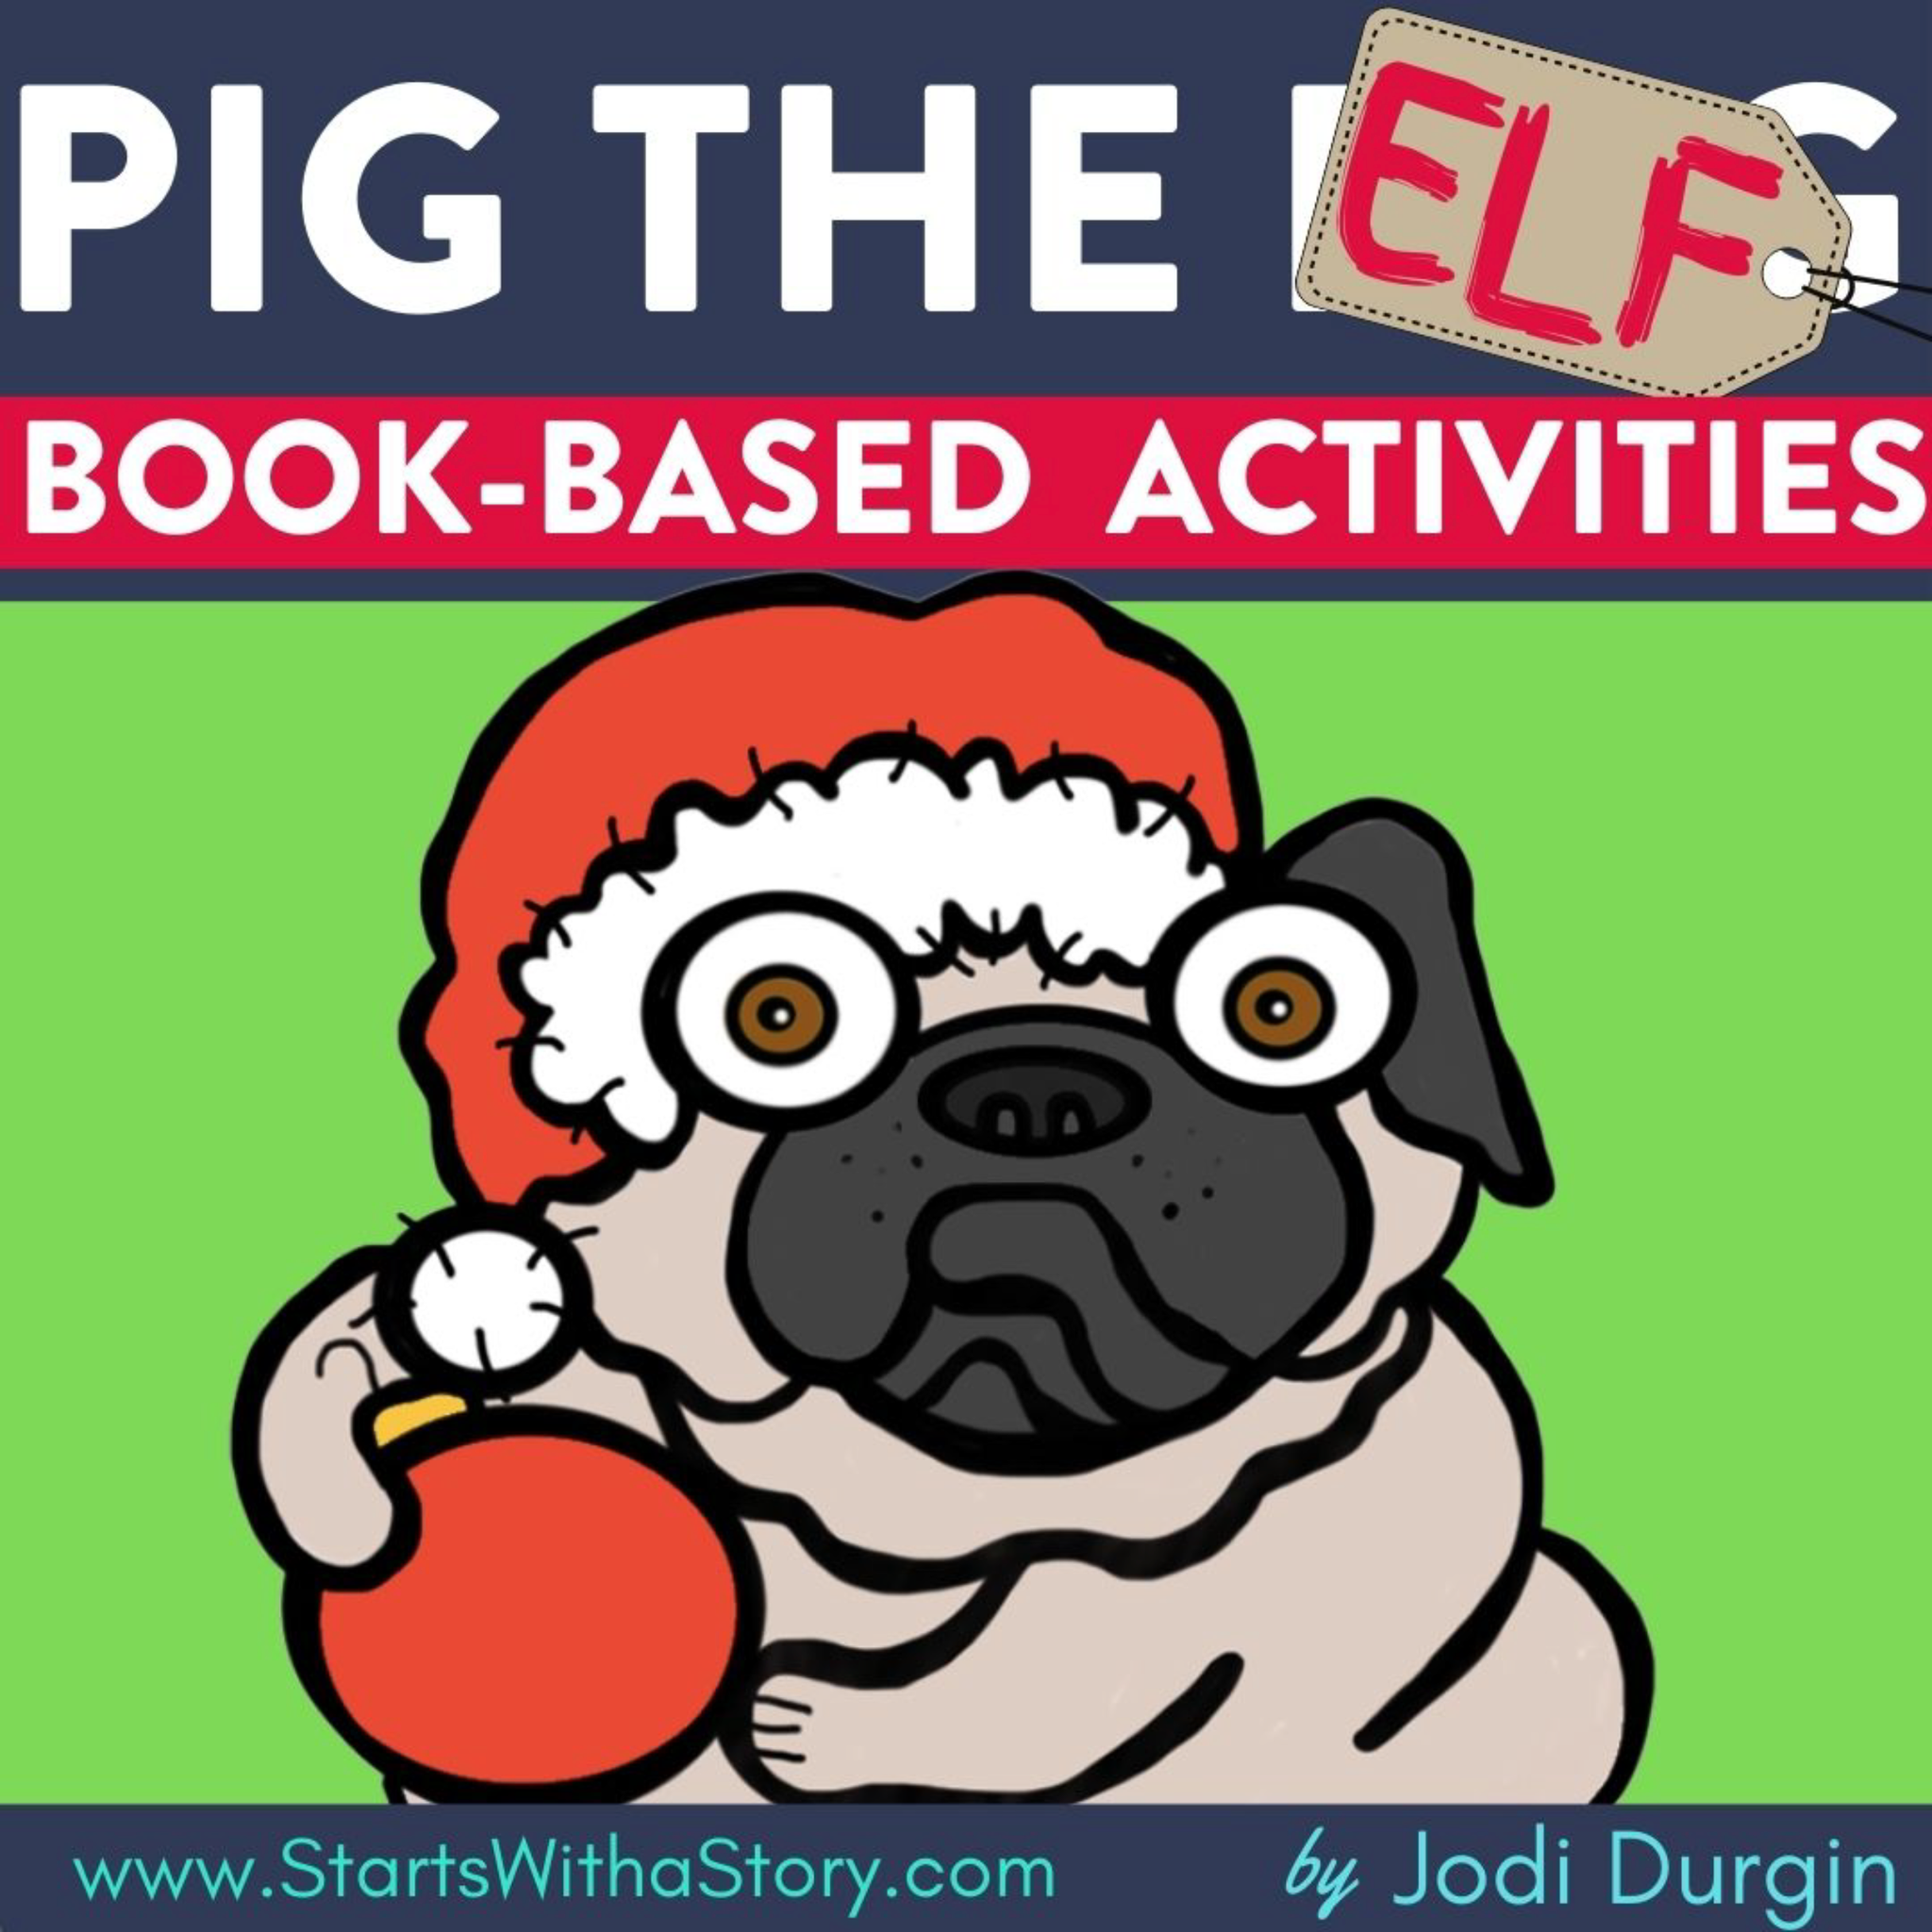 PIG THE ELF activities and lesson plan ideas